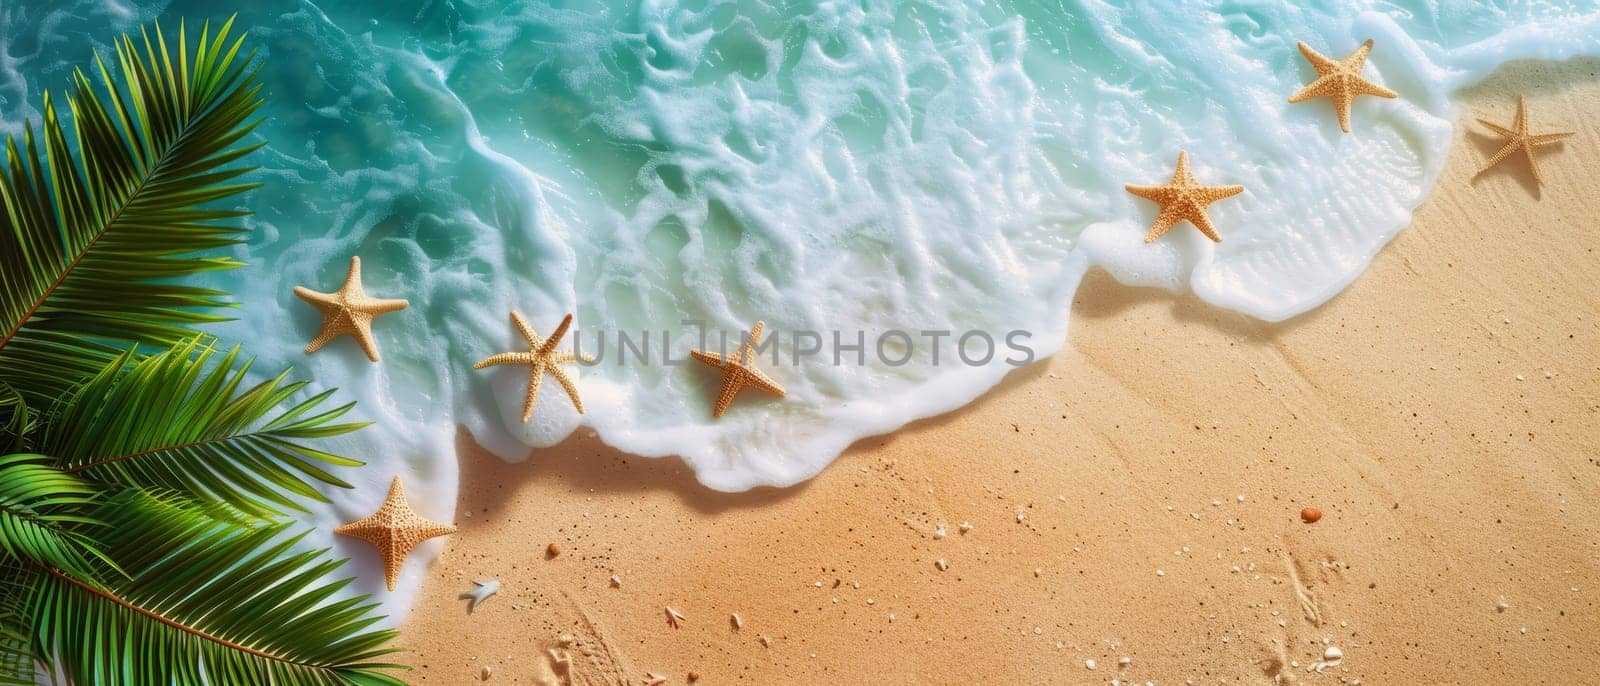 Pristine beach with turquoise waters, foamy waves, and starfish adorning the shore beneath palm fronds. Copy space for advertising, presentation product or text. by sfinks